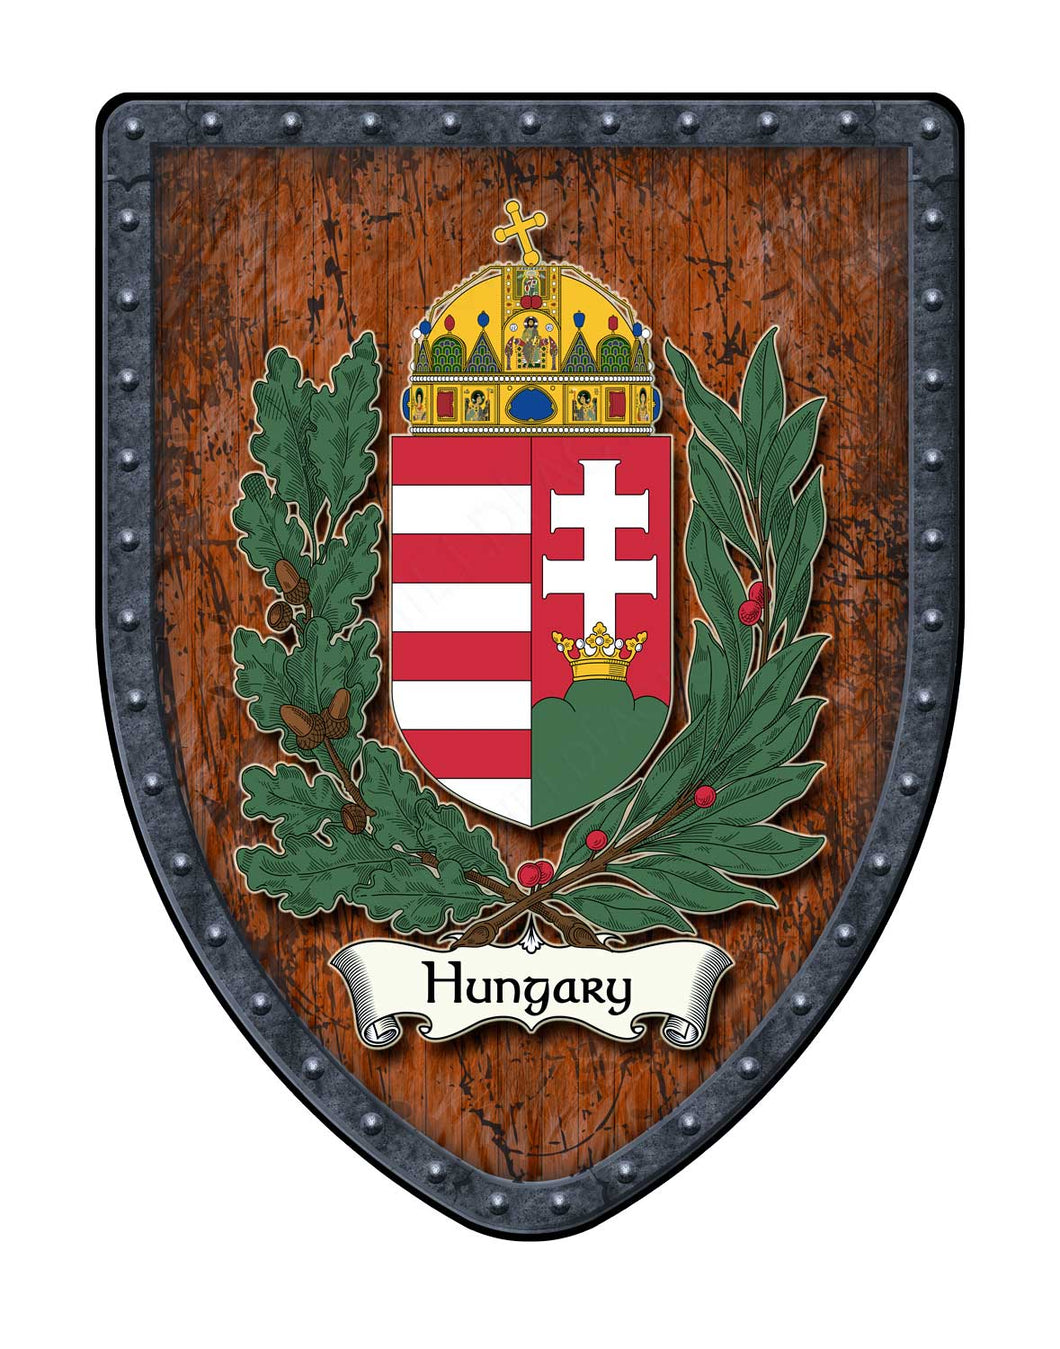 Hungary Coat of Arms Shield